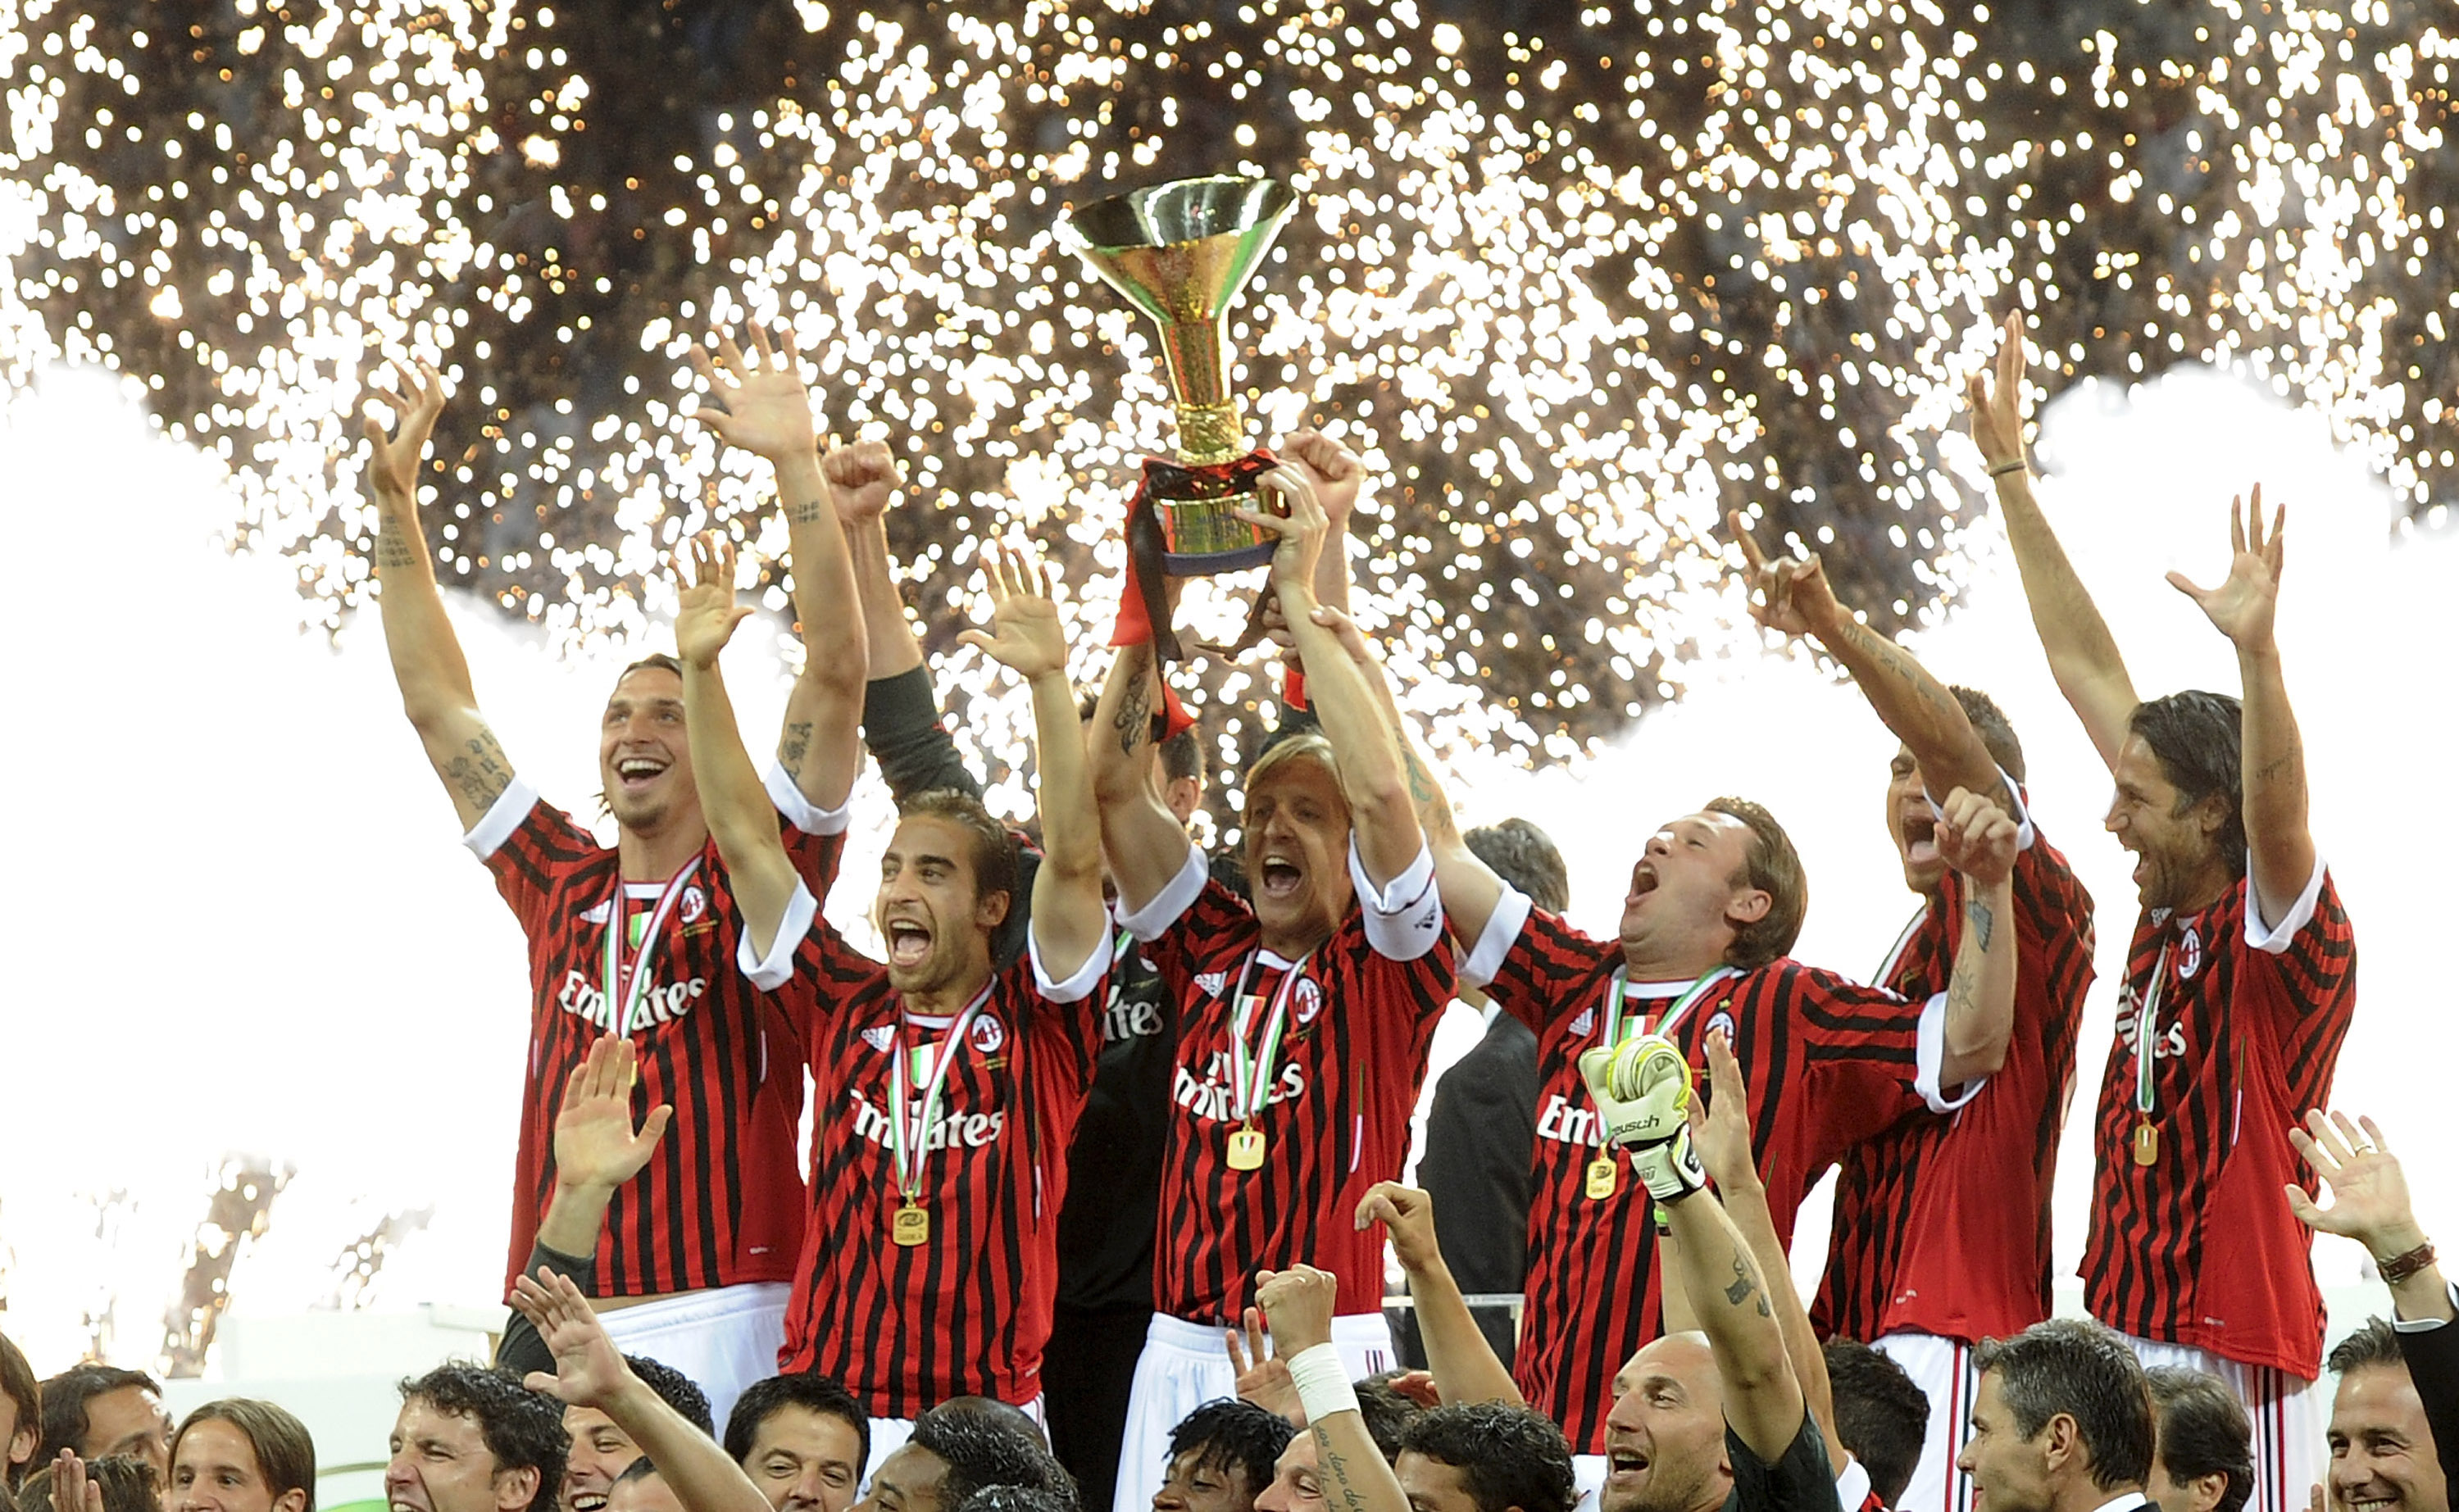 MILAN, ITALY - MAY 14:  Players of Milan celebrate winning the Italian Serie A championship after the Serie A match between AC Milan and Cagliari Calcio at Stadio Giuseppe Meazza on May 14, 2011 in Milan, Italy.  (Photo by Dino Panato/Getty Images)